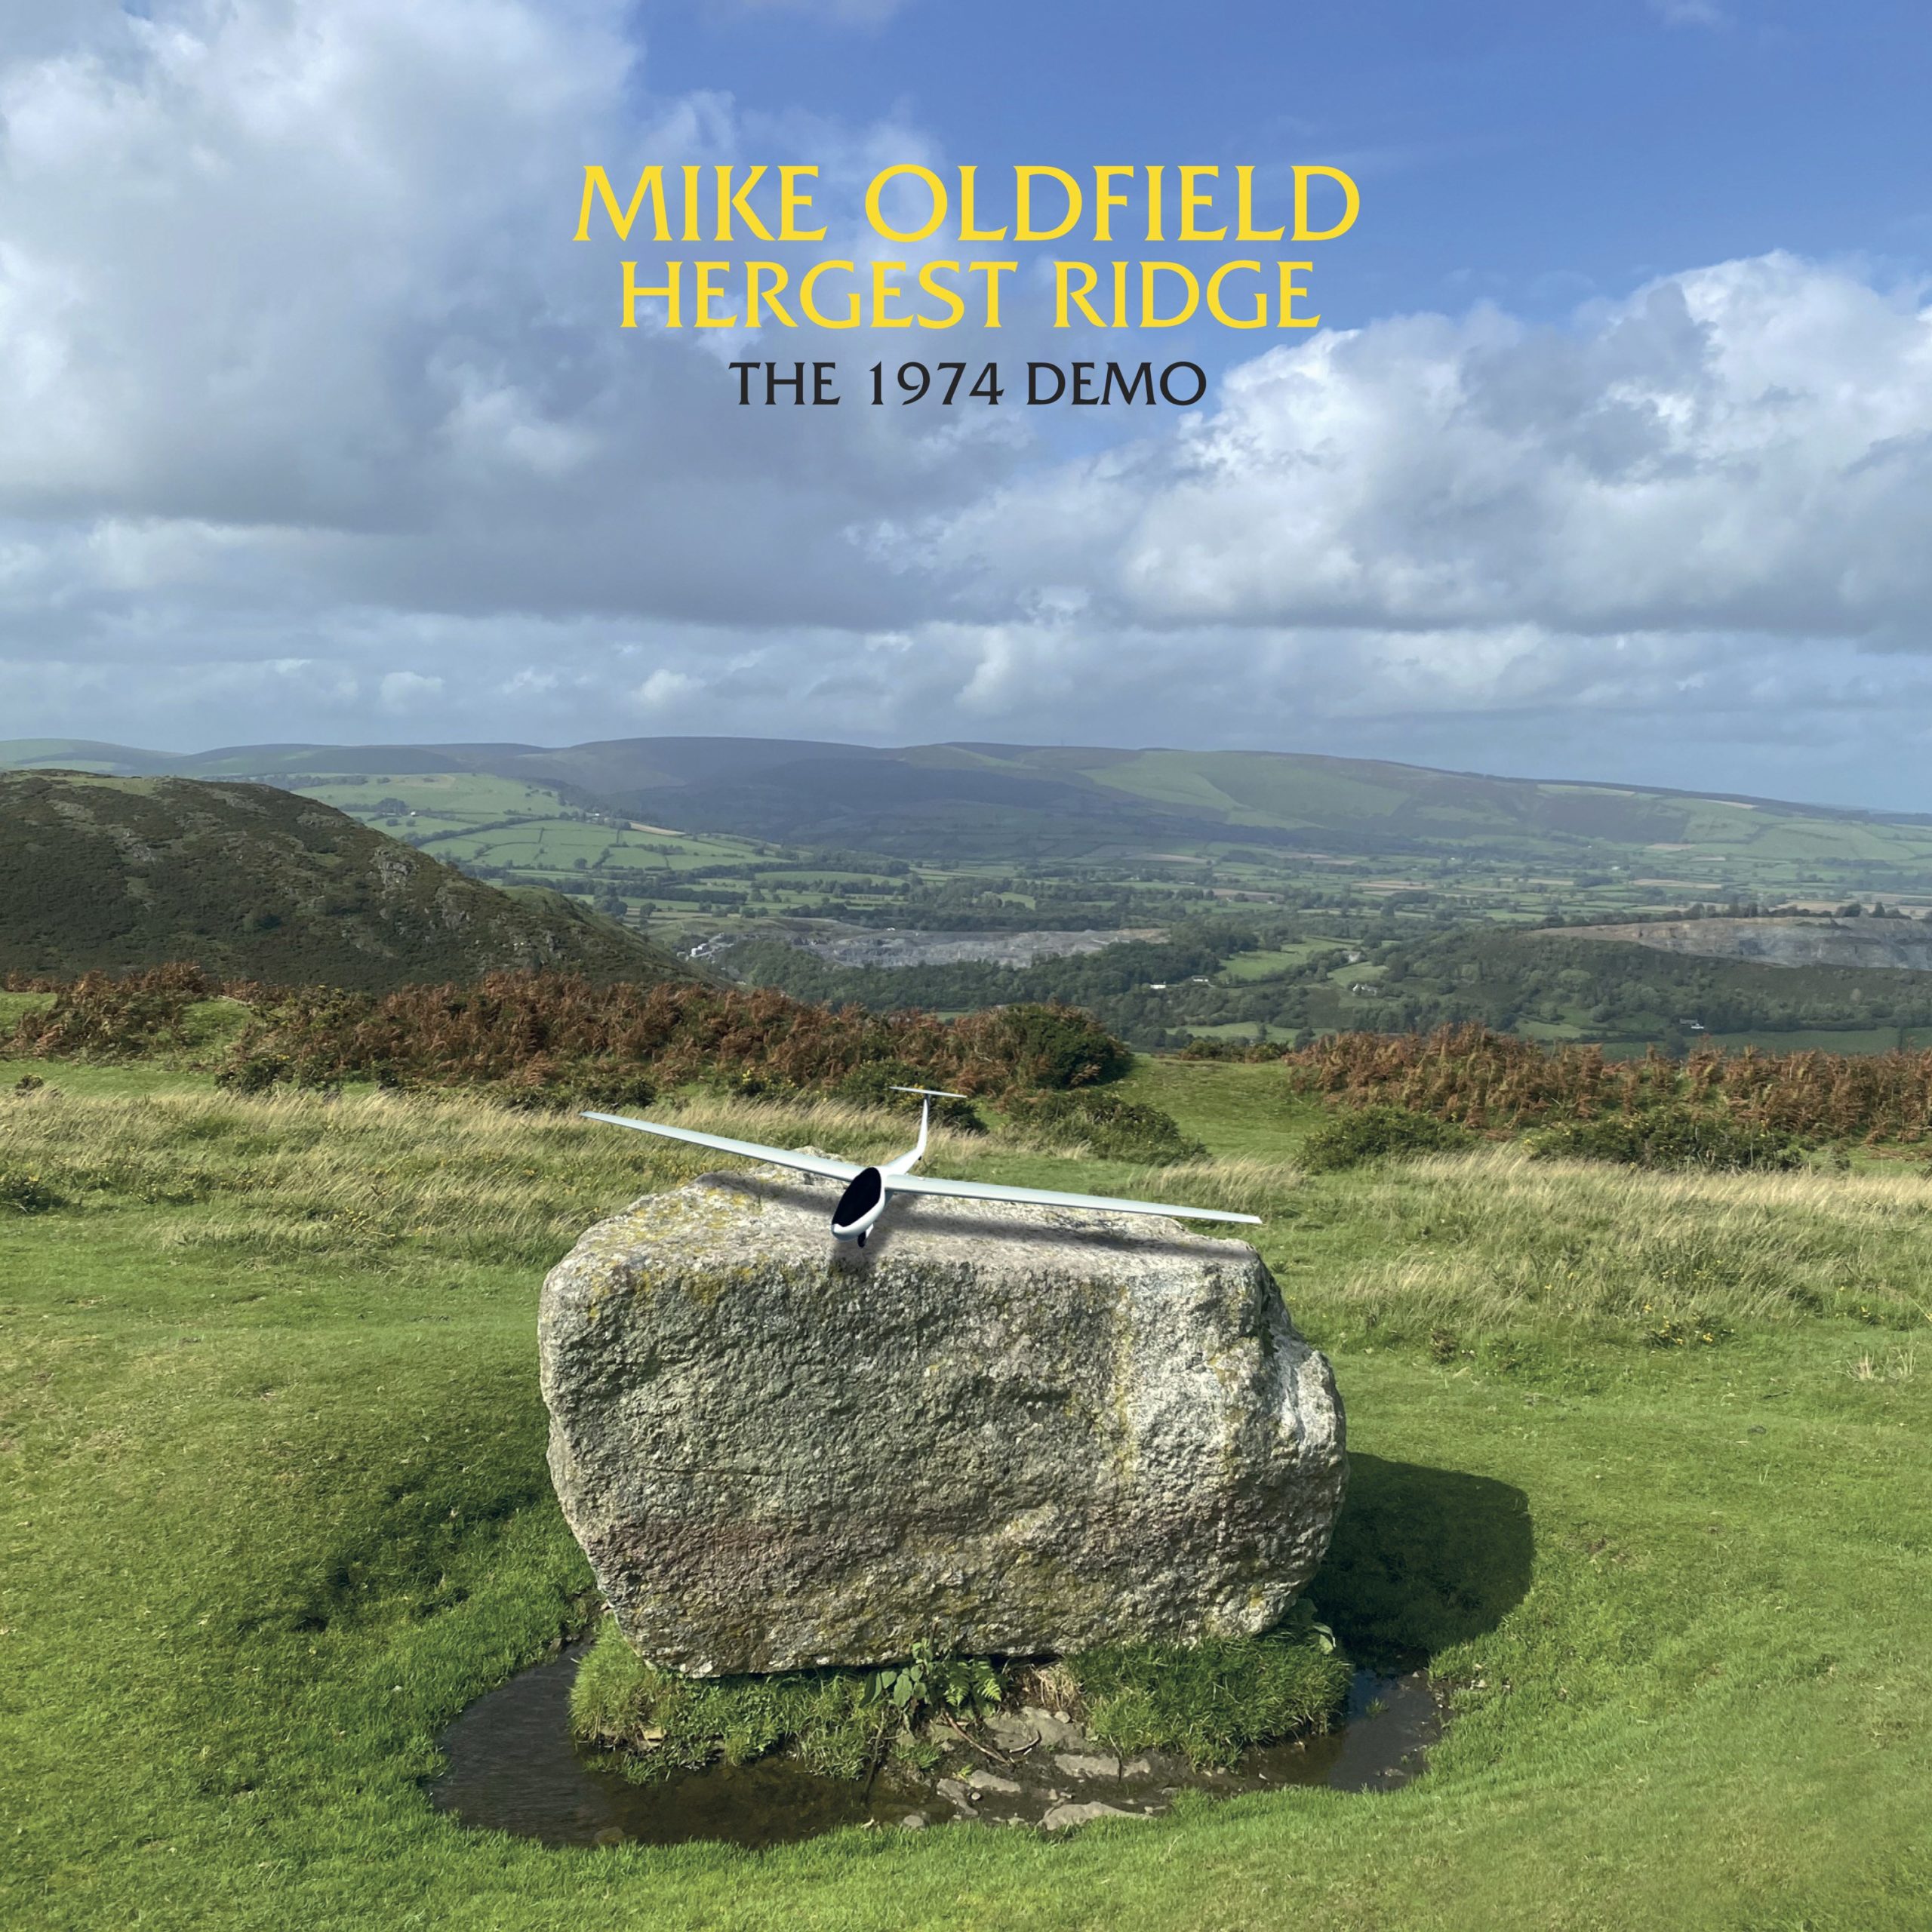 Mike-Oldfield-Hergest-Ridge-The-1974-Demo-scaled